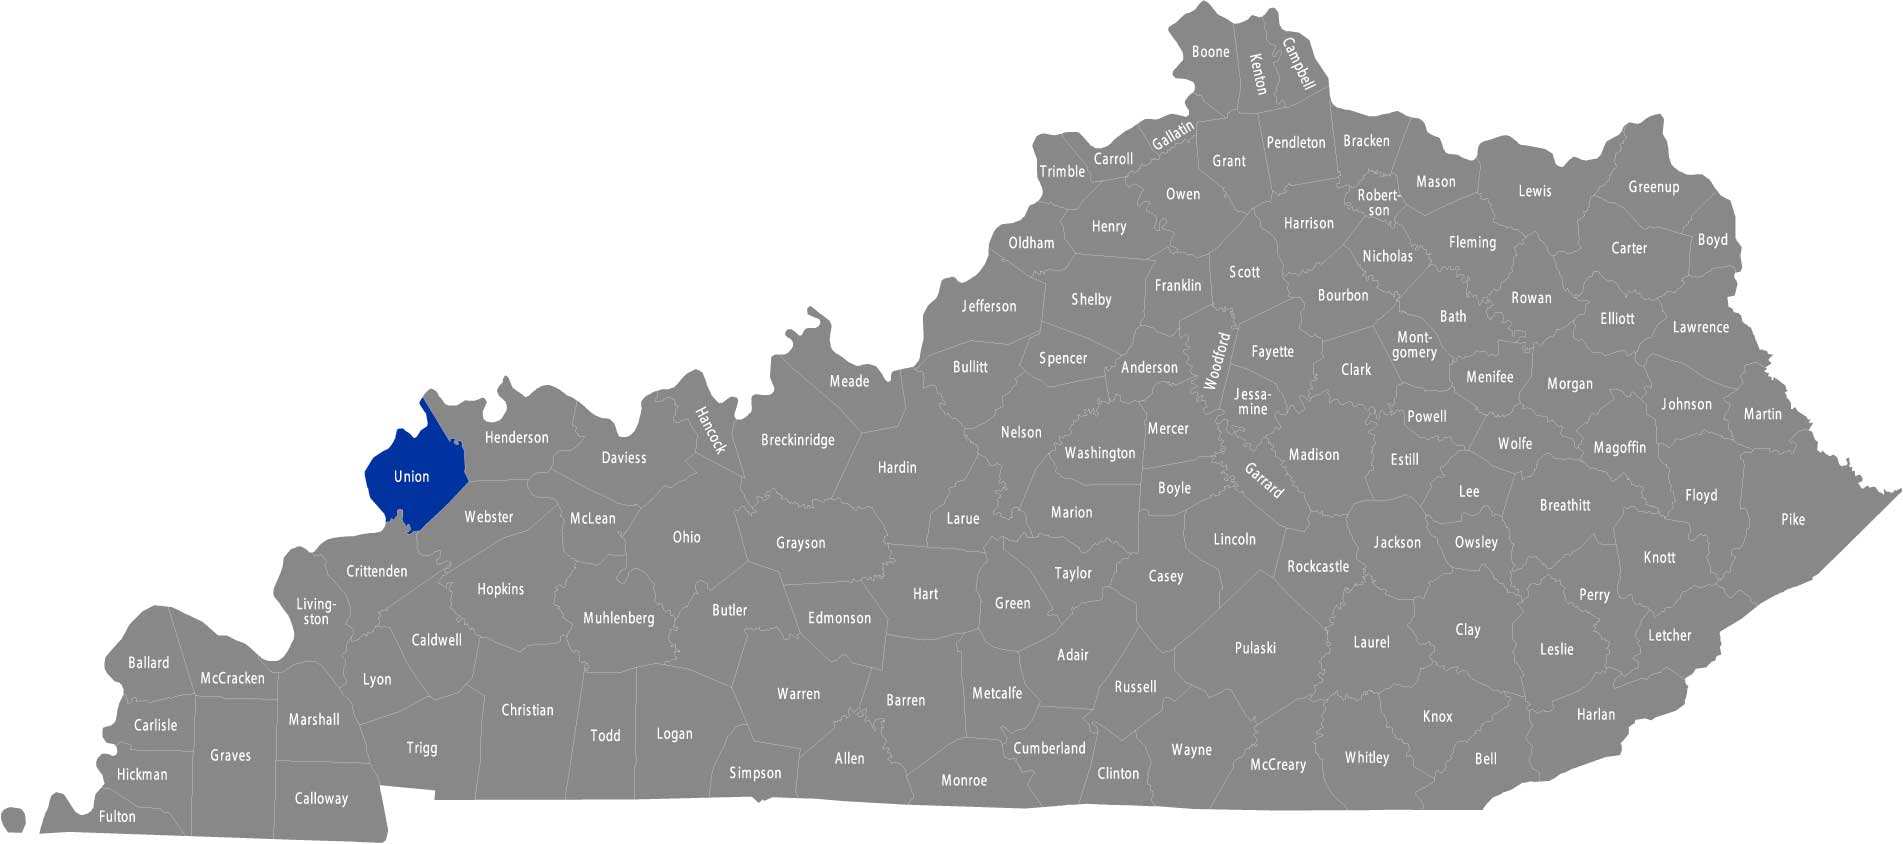 State of Kentucky map with Union County highlighted